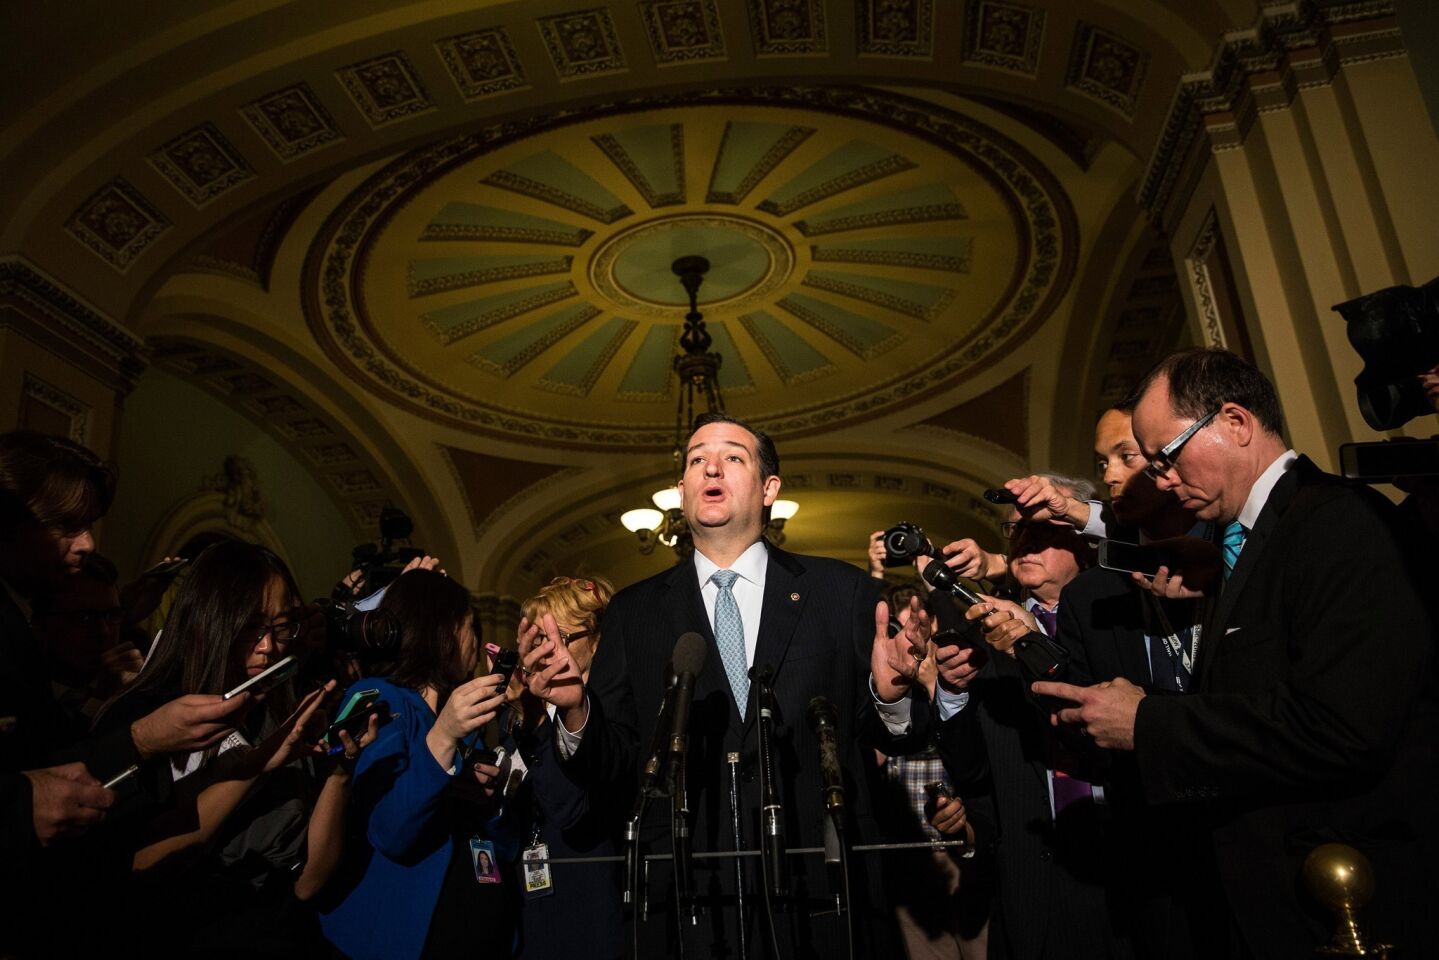 Sen. Ted Cruz (R-Texas), who railed against any government funding for federal healthcare, answers questions from members of the media after meeting with Republican senators.